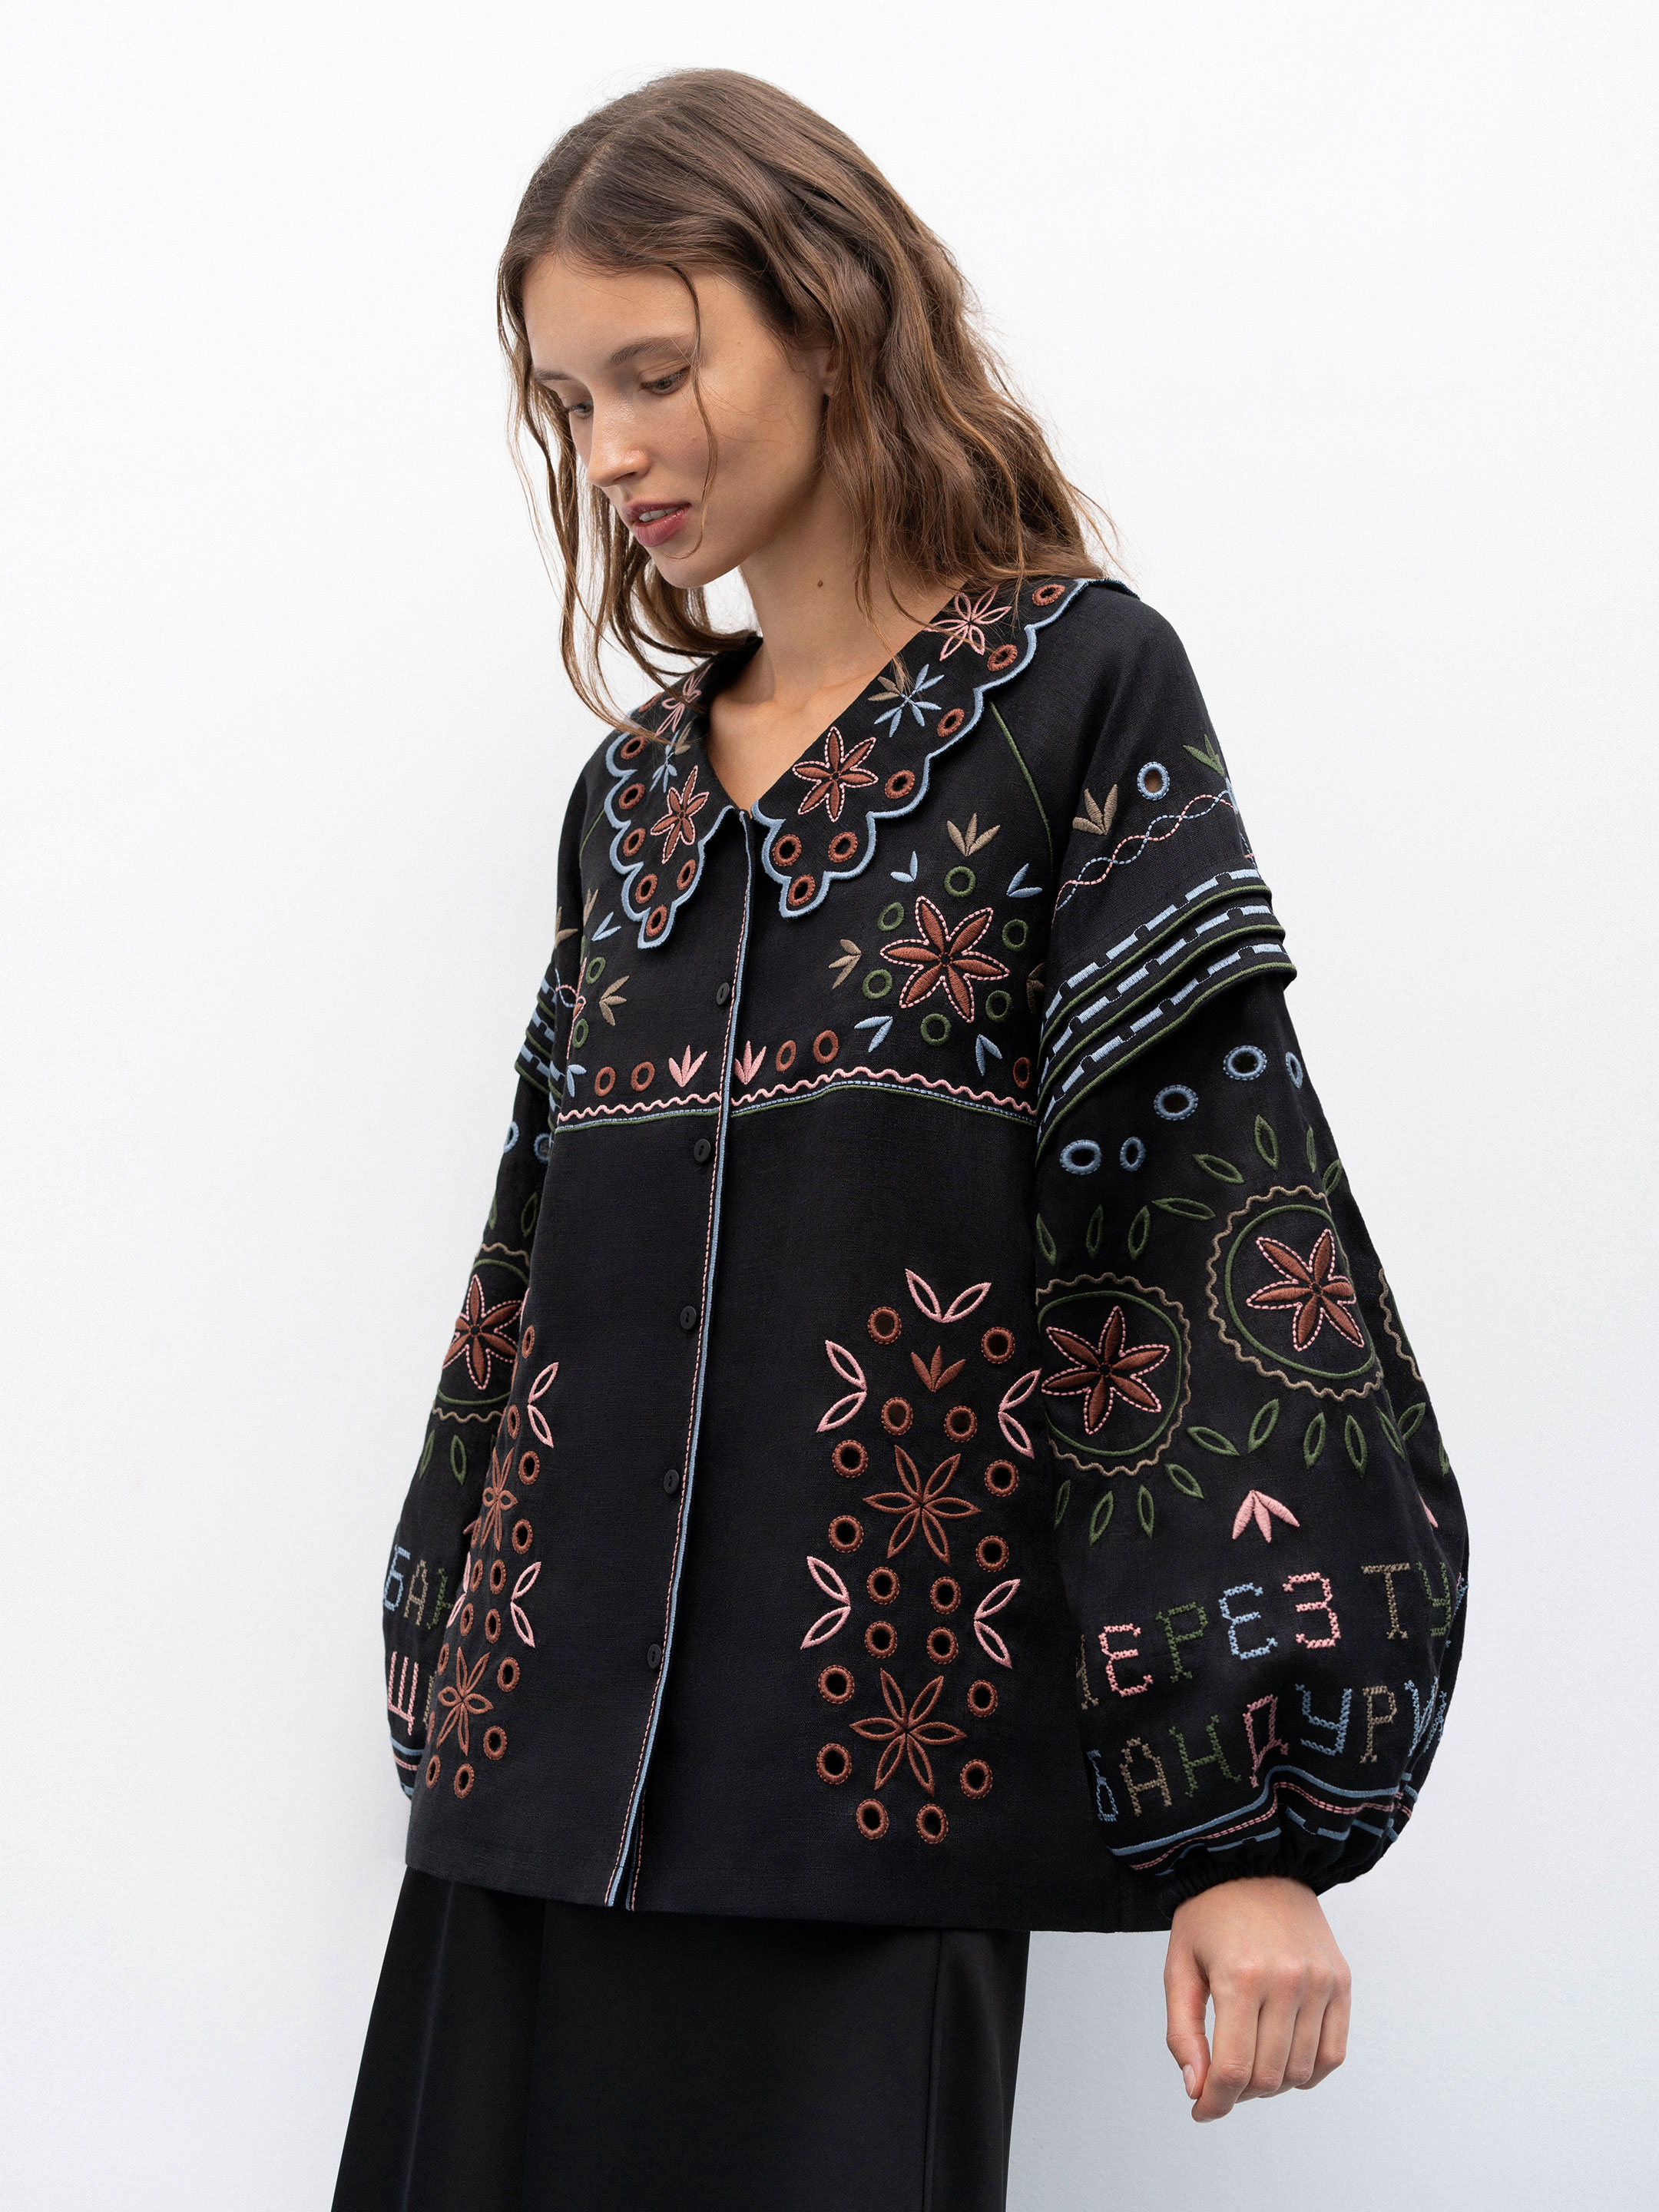 Embroidered jacket made of black linen with a collar Bandura Temna - photo 1